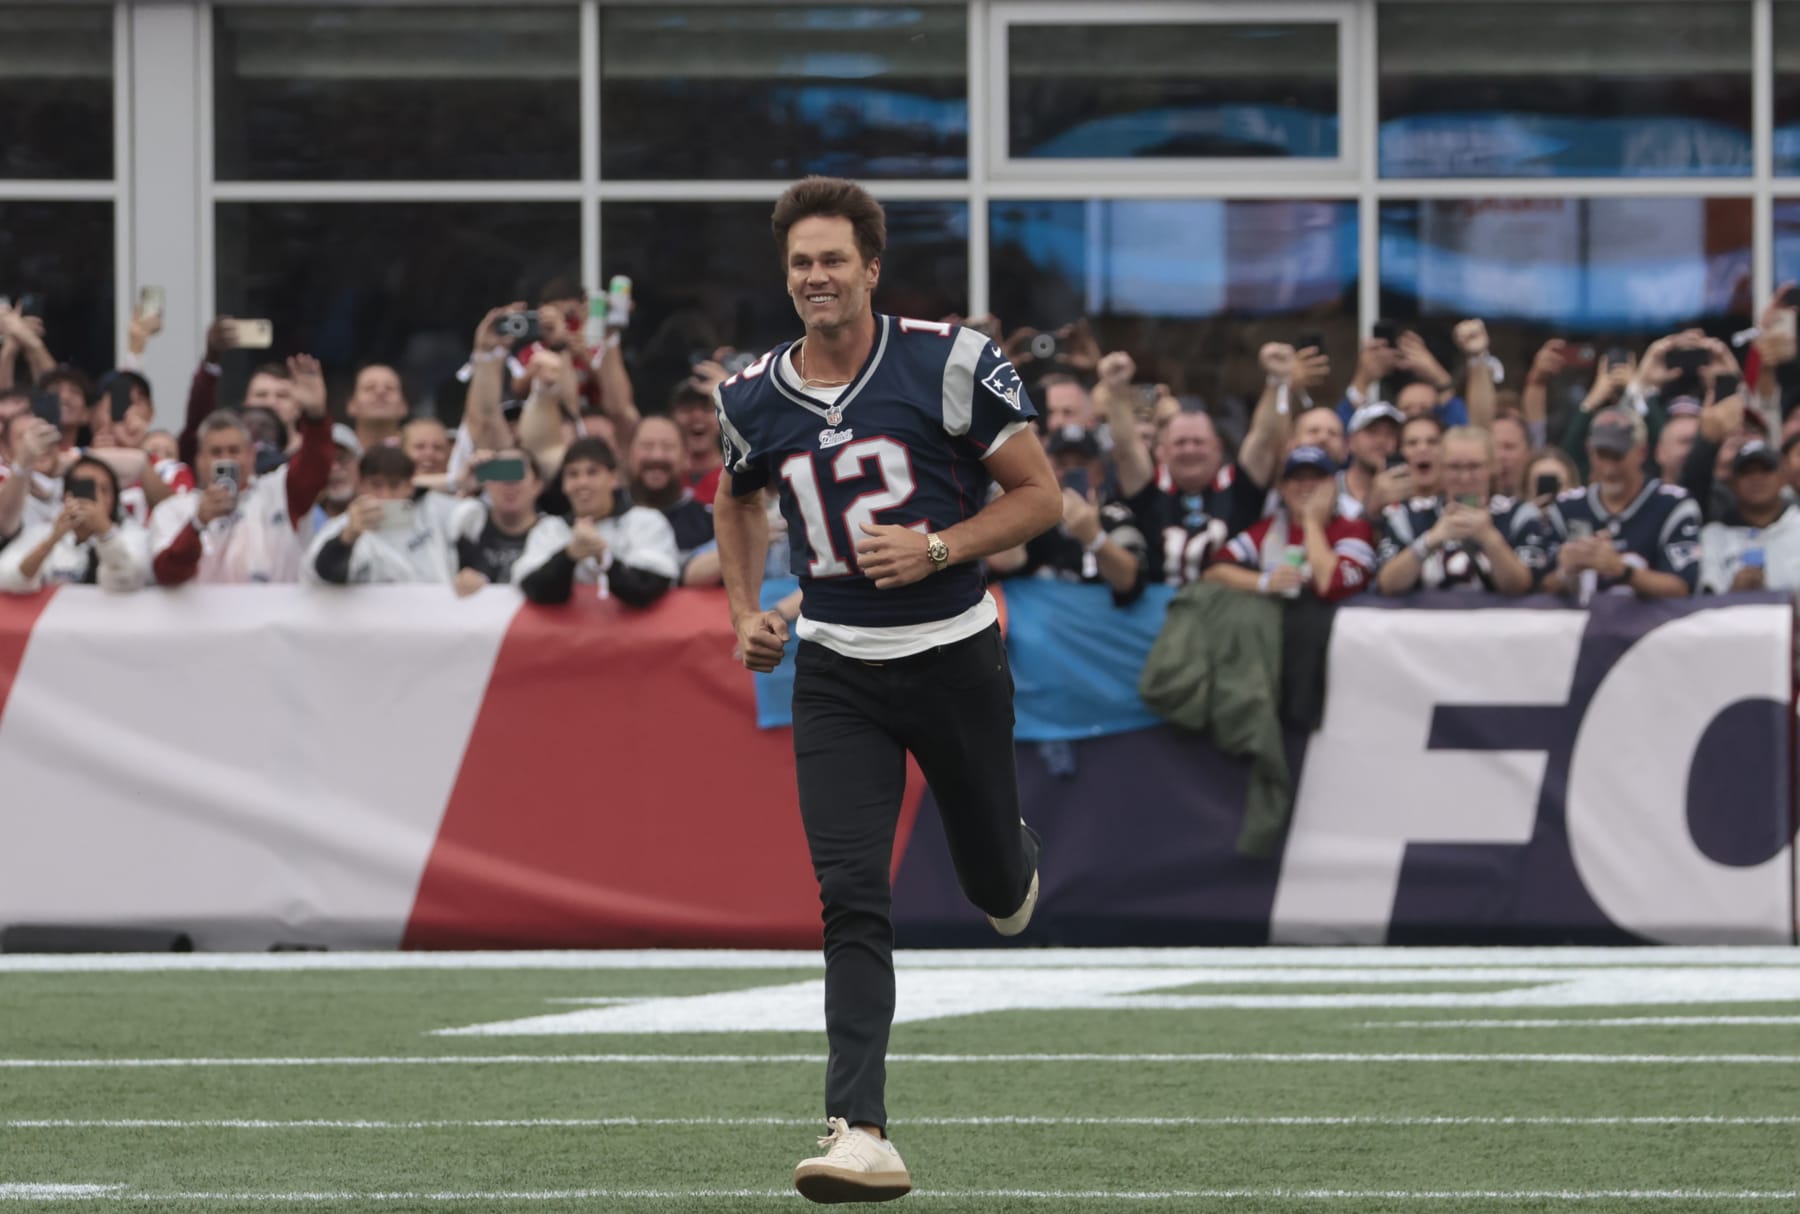 NFL legend Tom Brady discusses possibility of participating in MrBeast challenge video